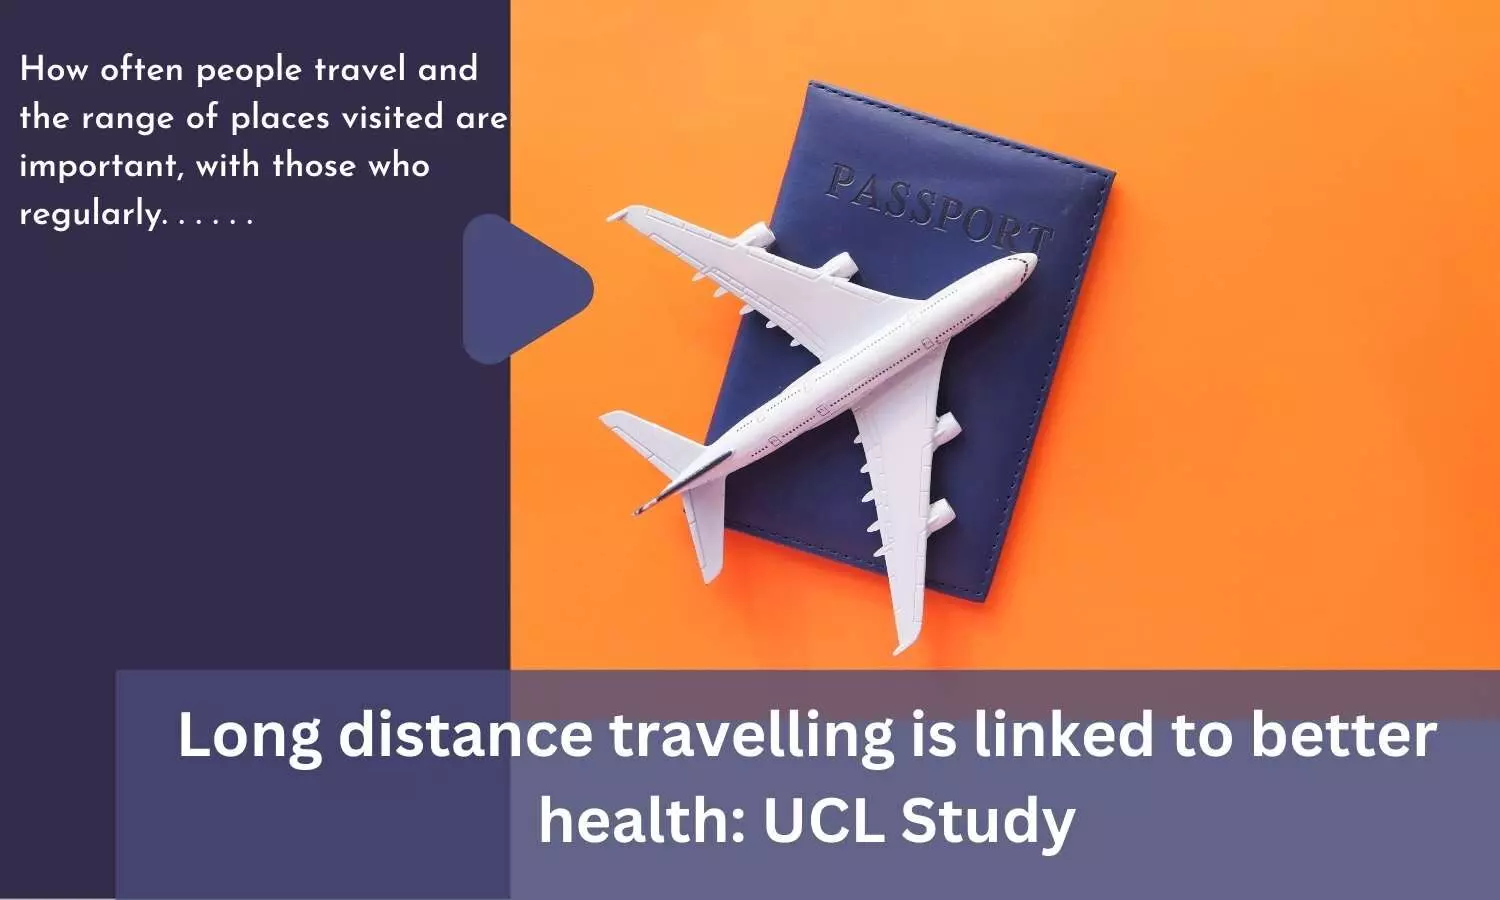 Long distance travelling is linked to better health: UCL Study